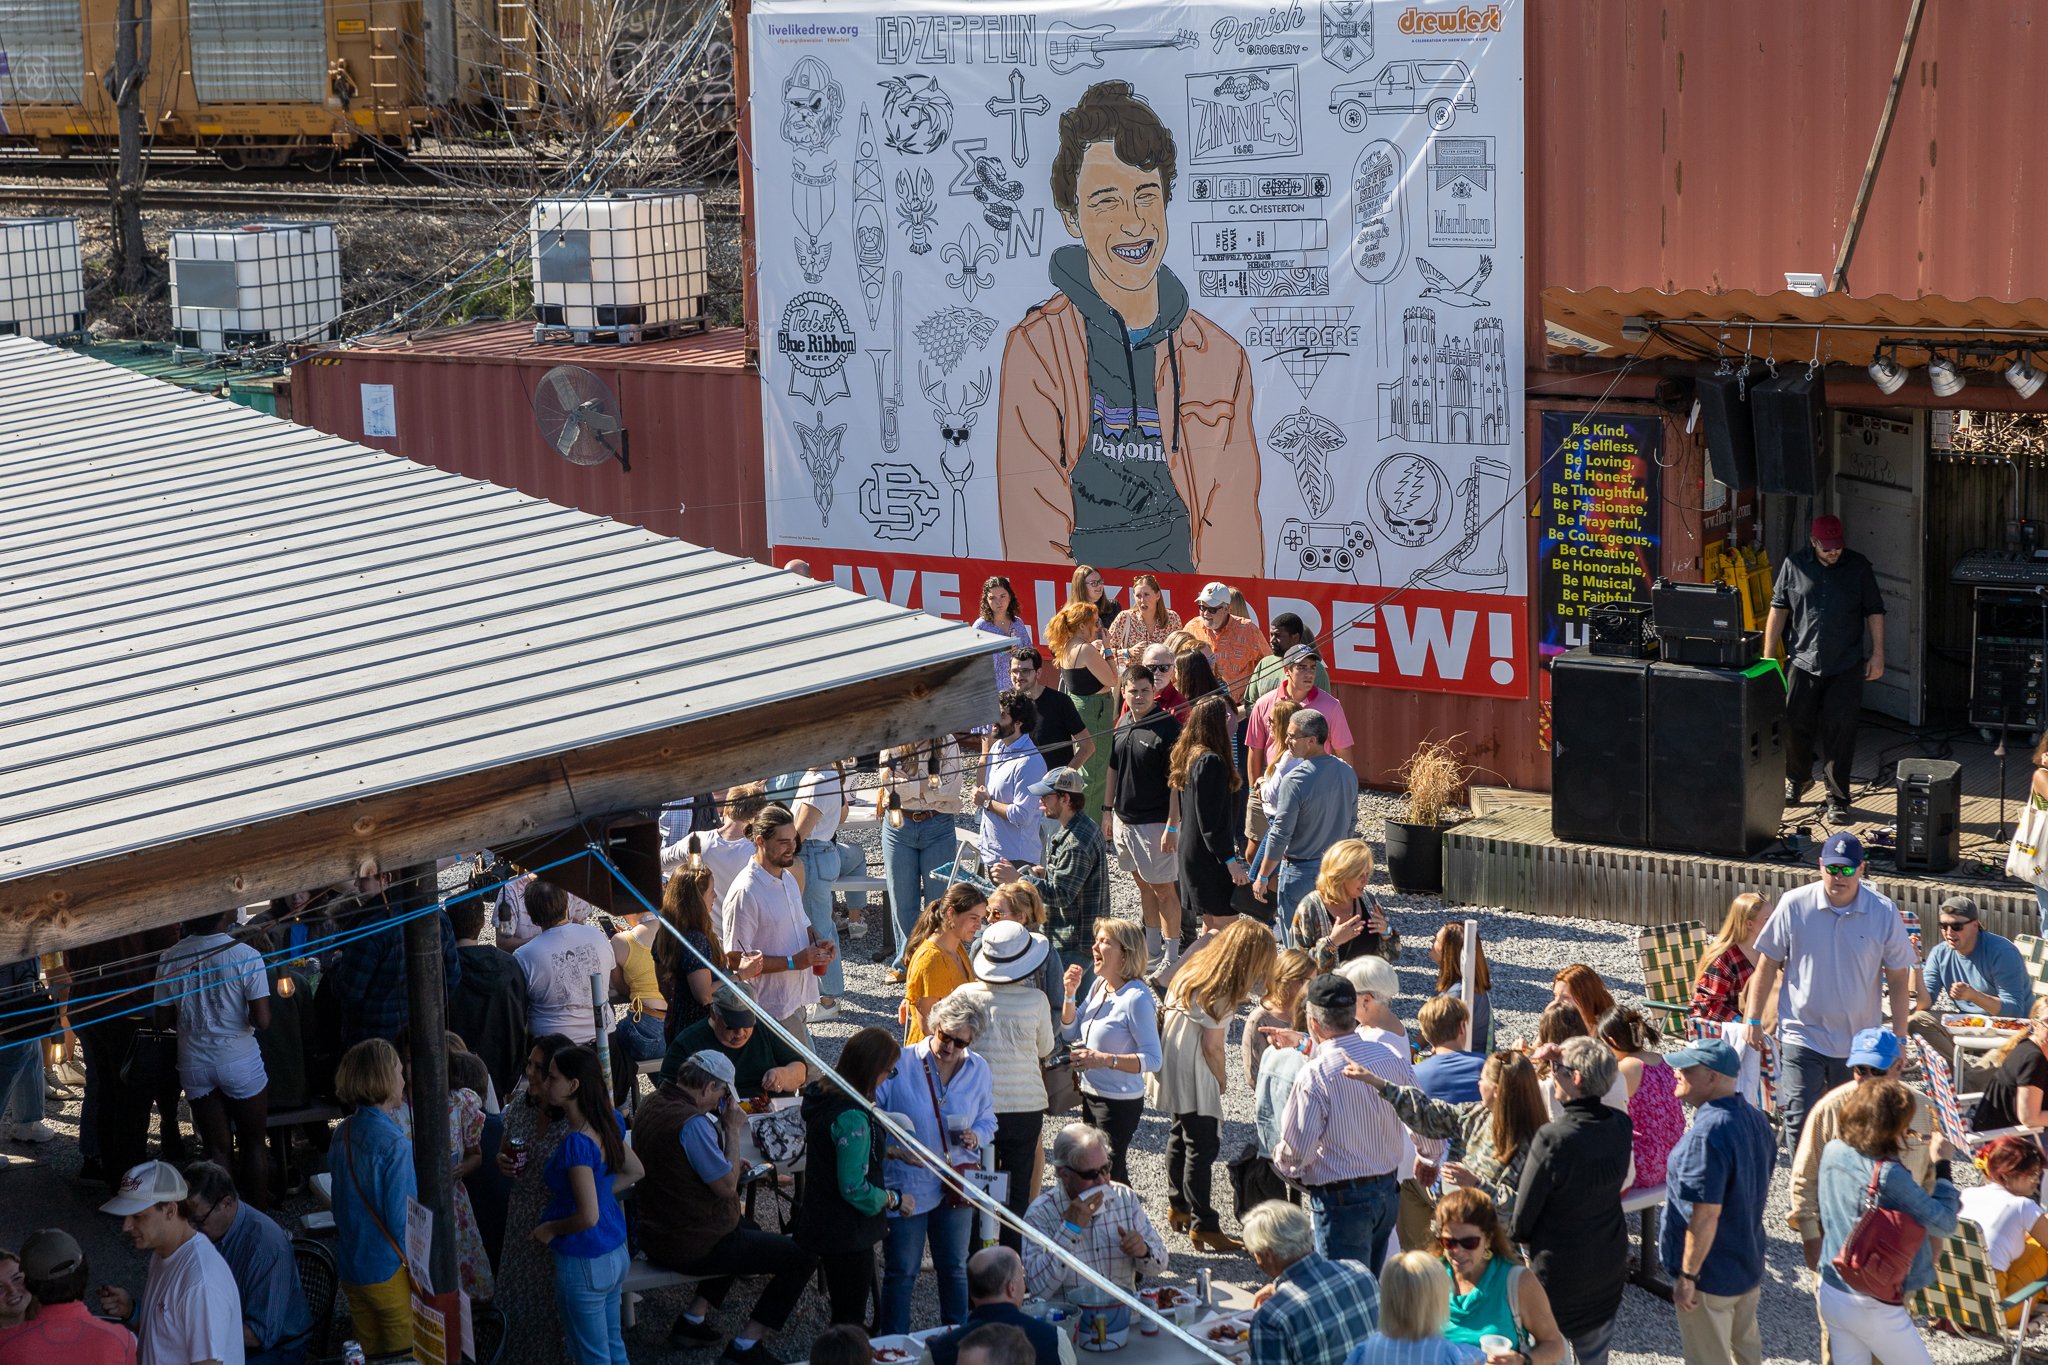  DrewFest Memphis event banner wall  Railgarten  Branding creative and design by Chuck Mitchell  Pro bono project celebrating the life of Drew Rainer  Illustration by Fiona Bono  Photograph by Bryant Cummings 